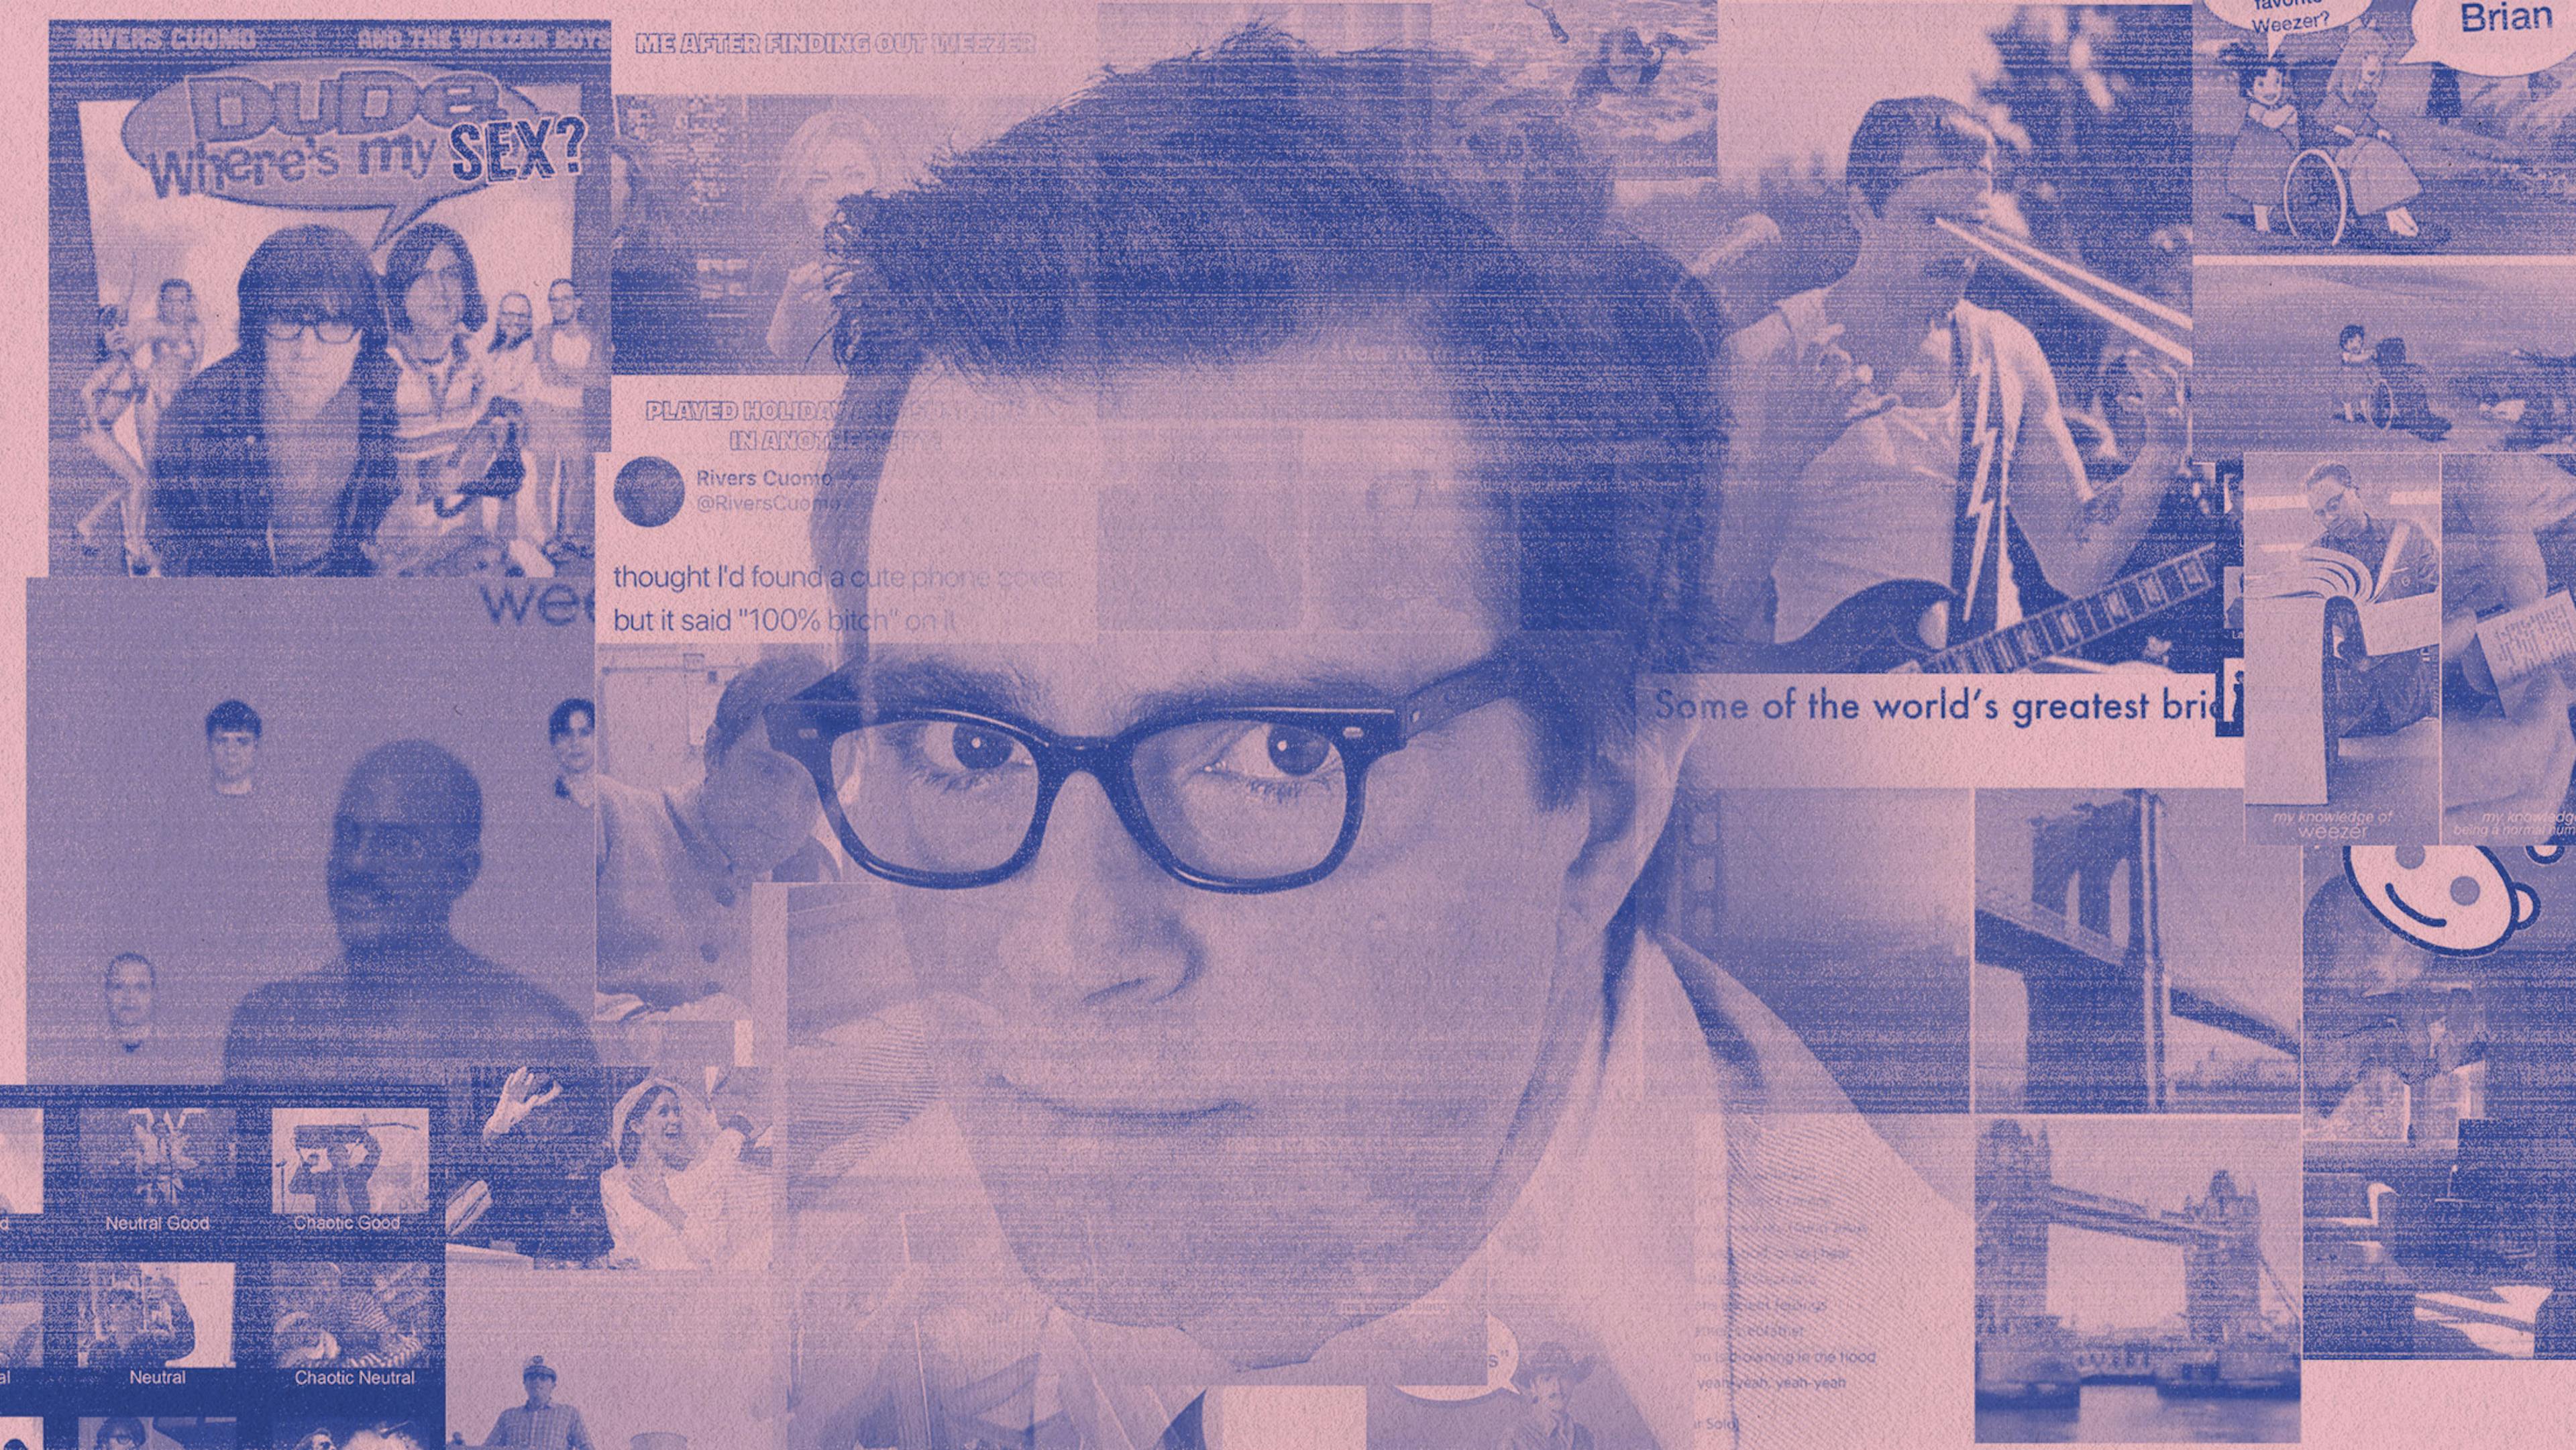 Only In Memes: How Rivers Cuomo Became The King Of The Internet